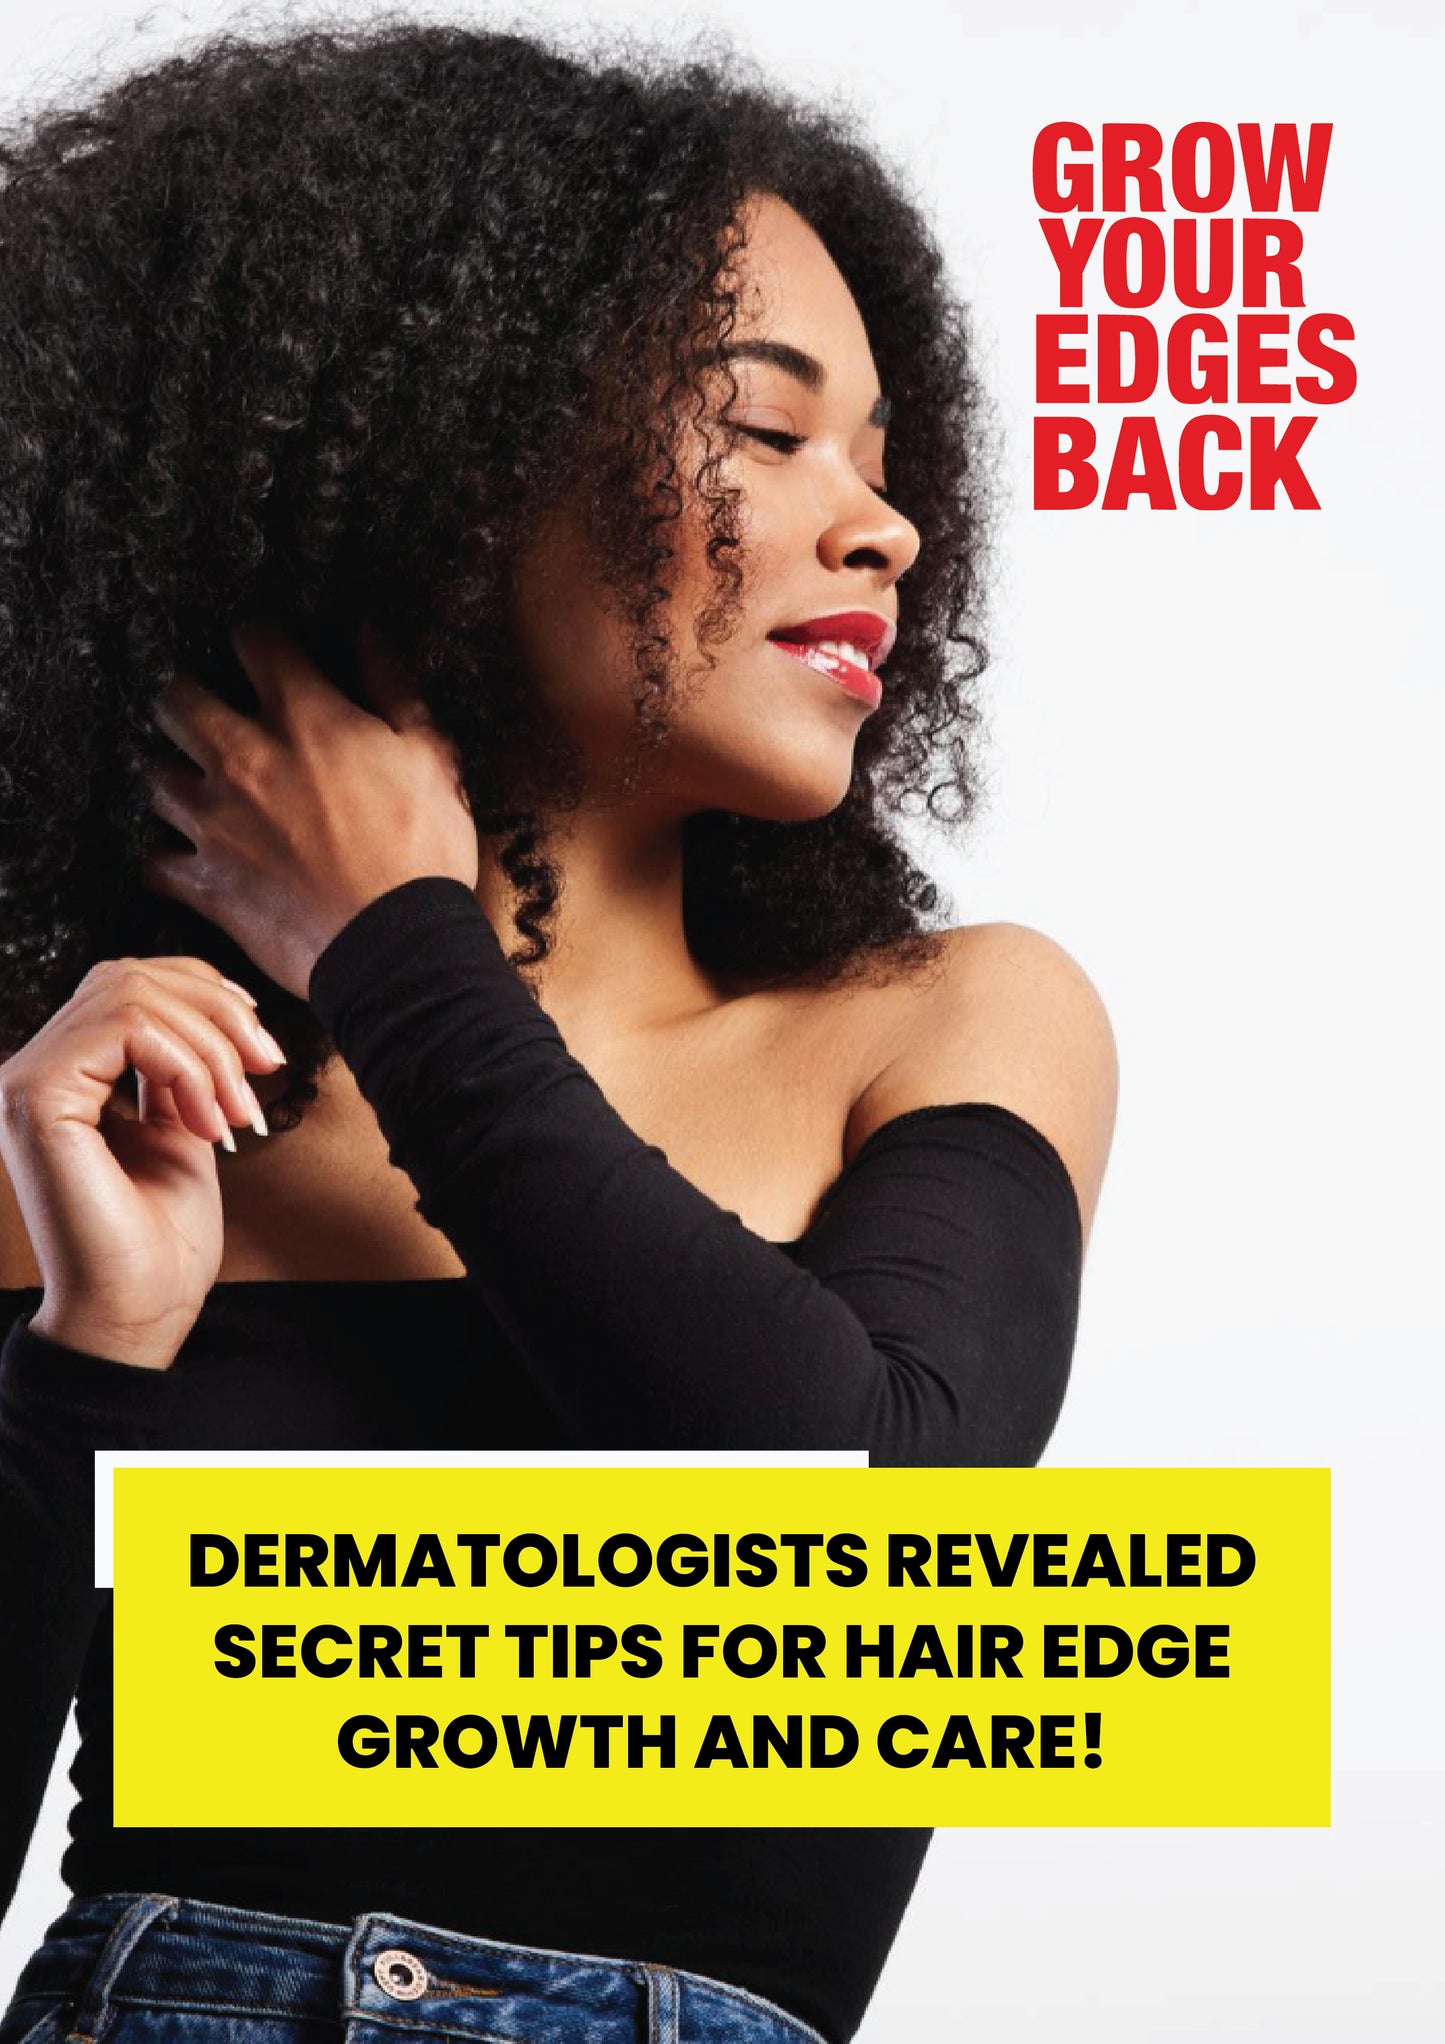 EBOOK: DERMATOLOGISTS REVEALED SECRET TIPS FOR HAIR EDGE GROWTH AND CARE